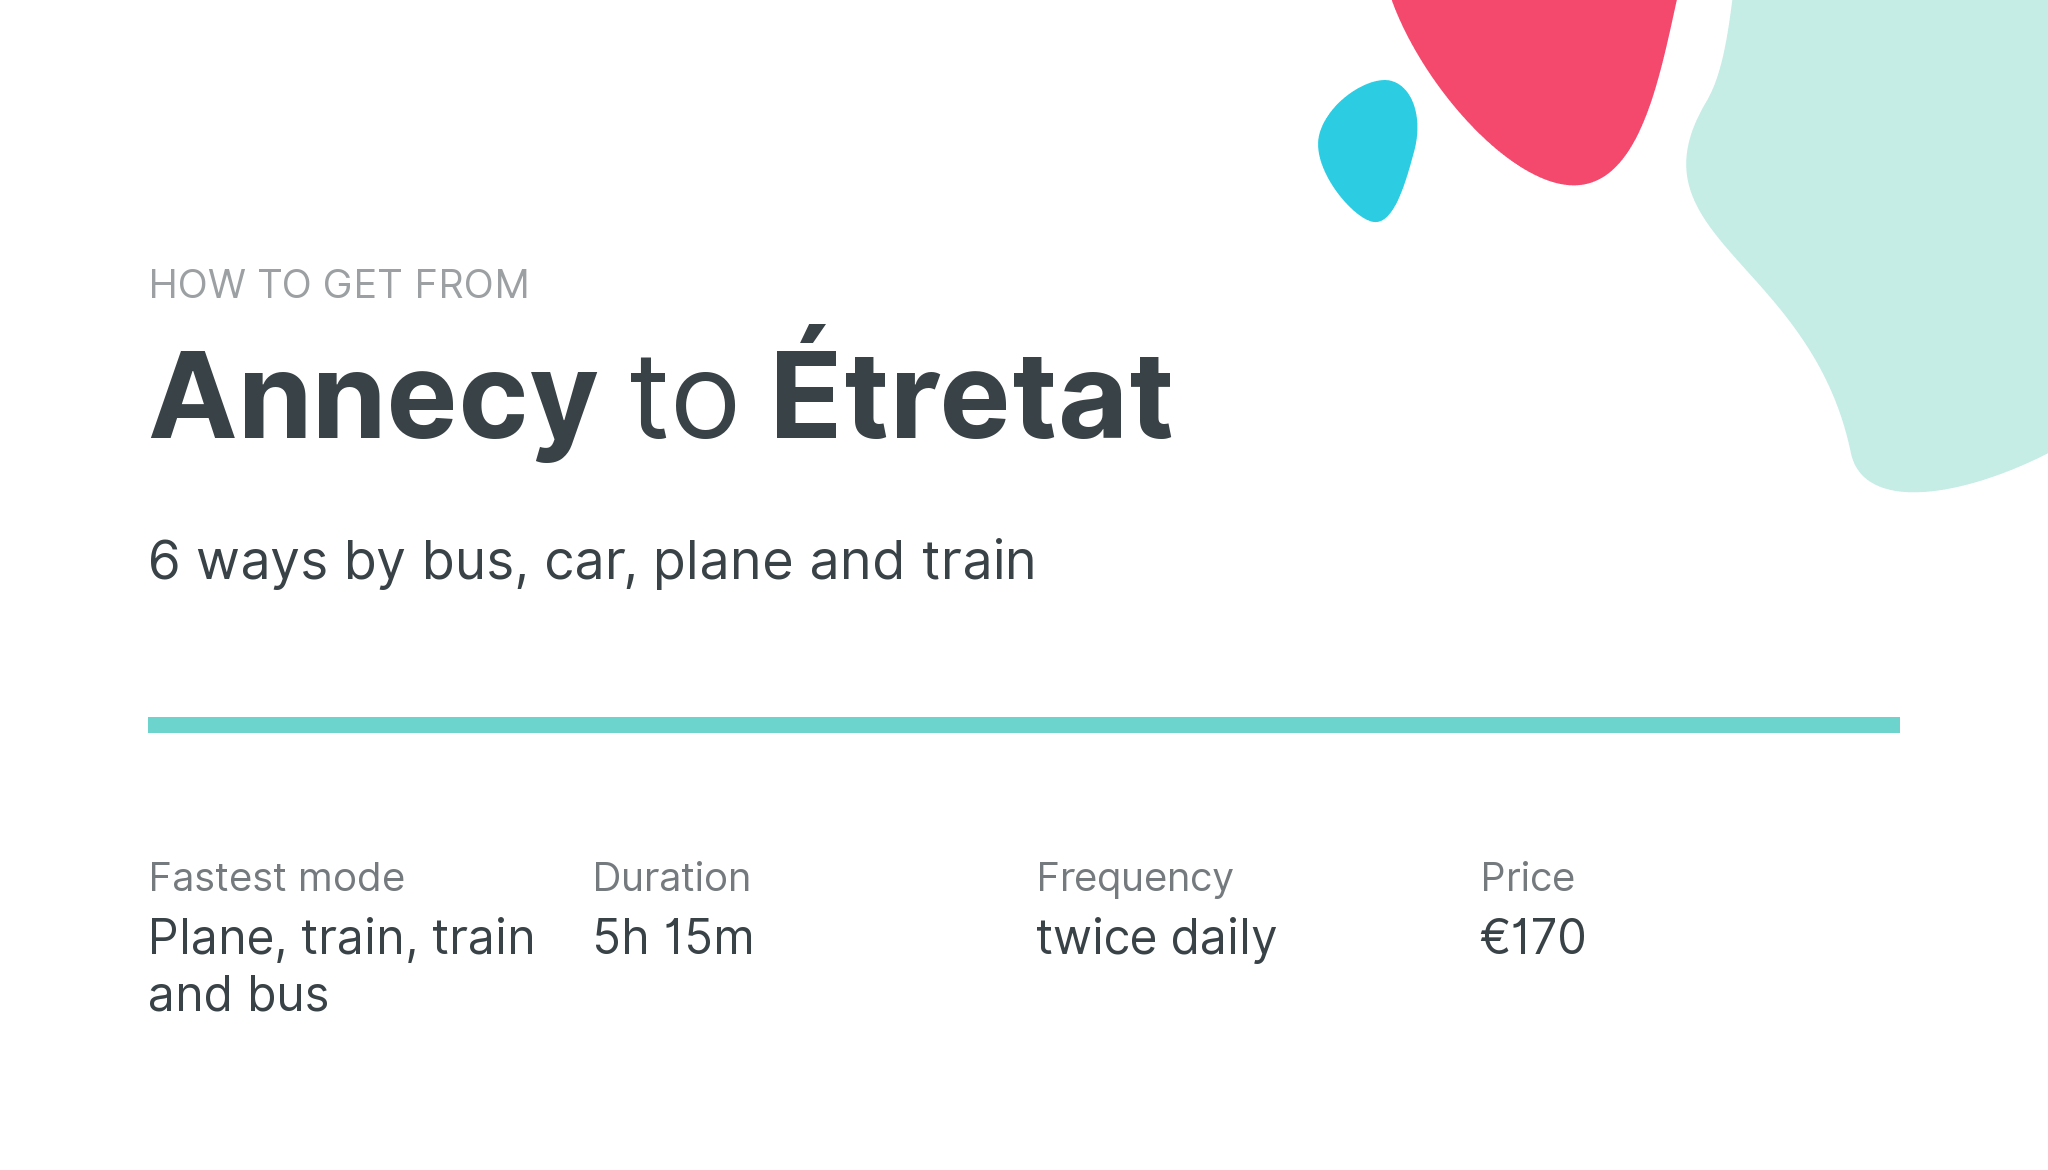 How do I get from Annecy to Étretat